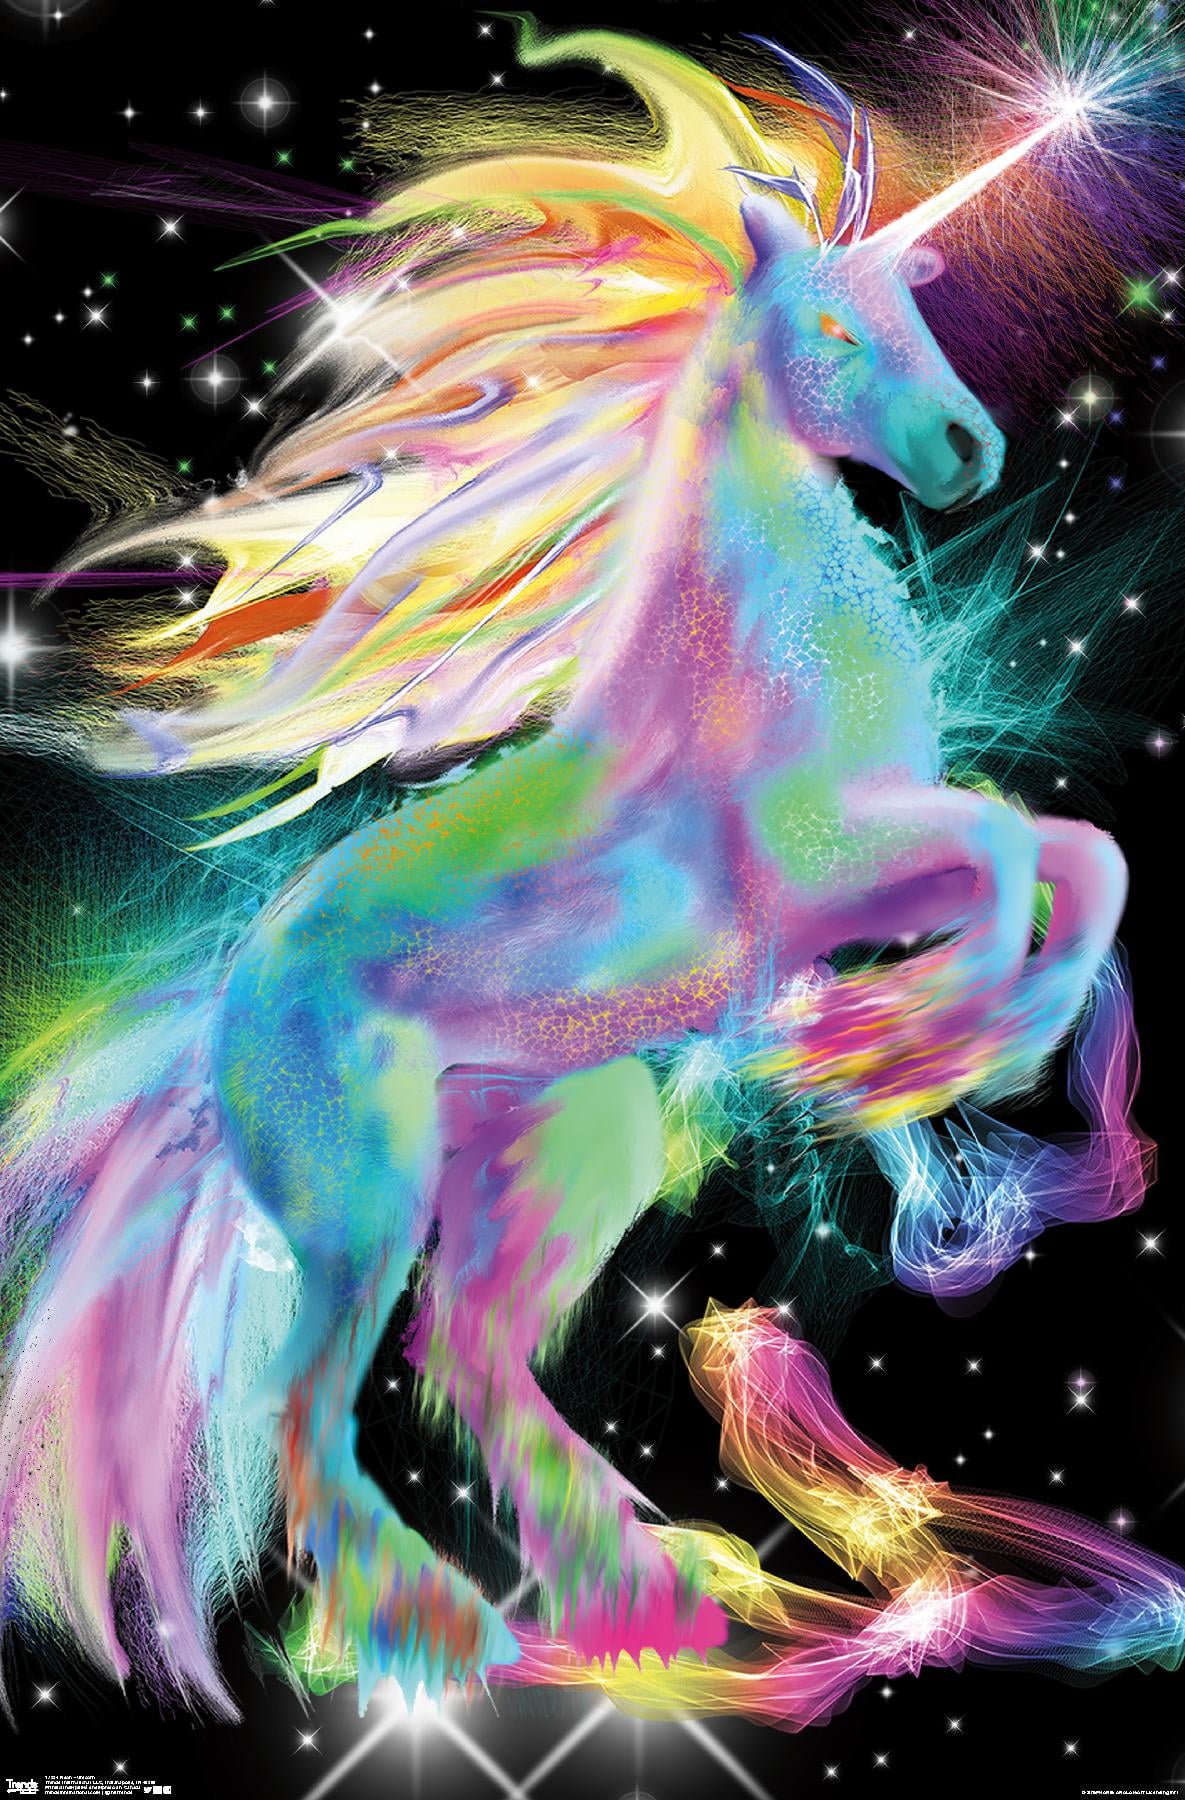 keep calm ride Print  unicorn  a4 glossy poster picture,unframed 